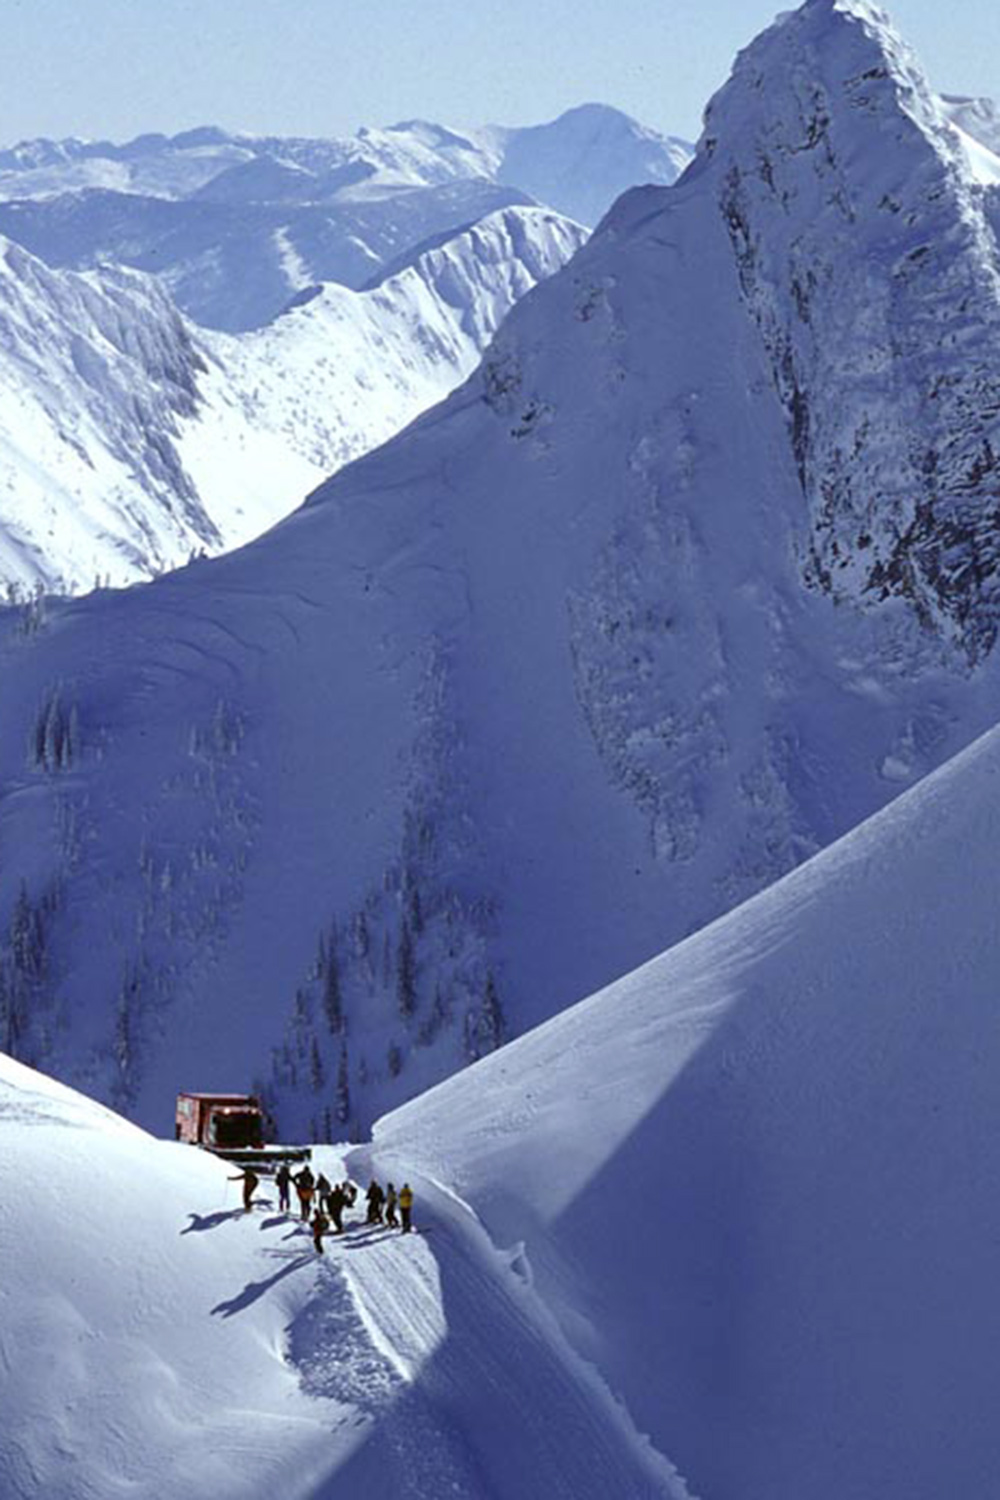 Cat Skiing Advantages - Lower Investment